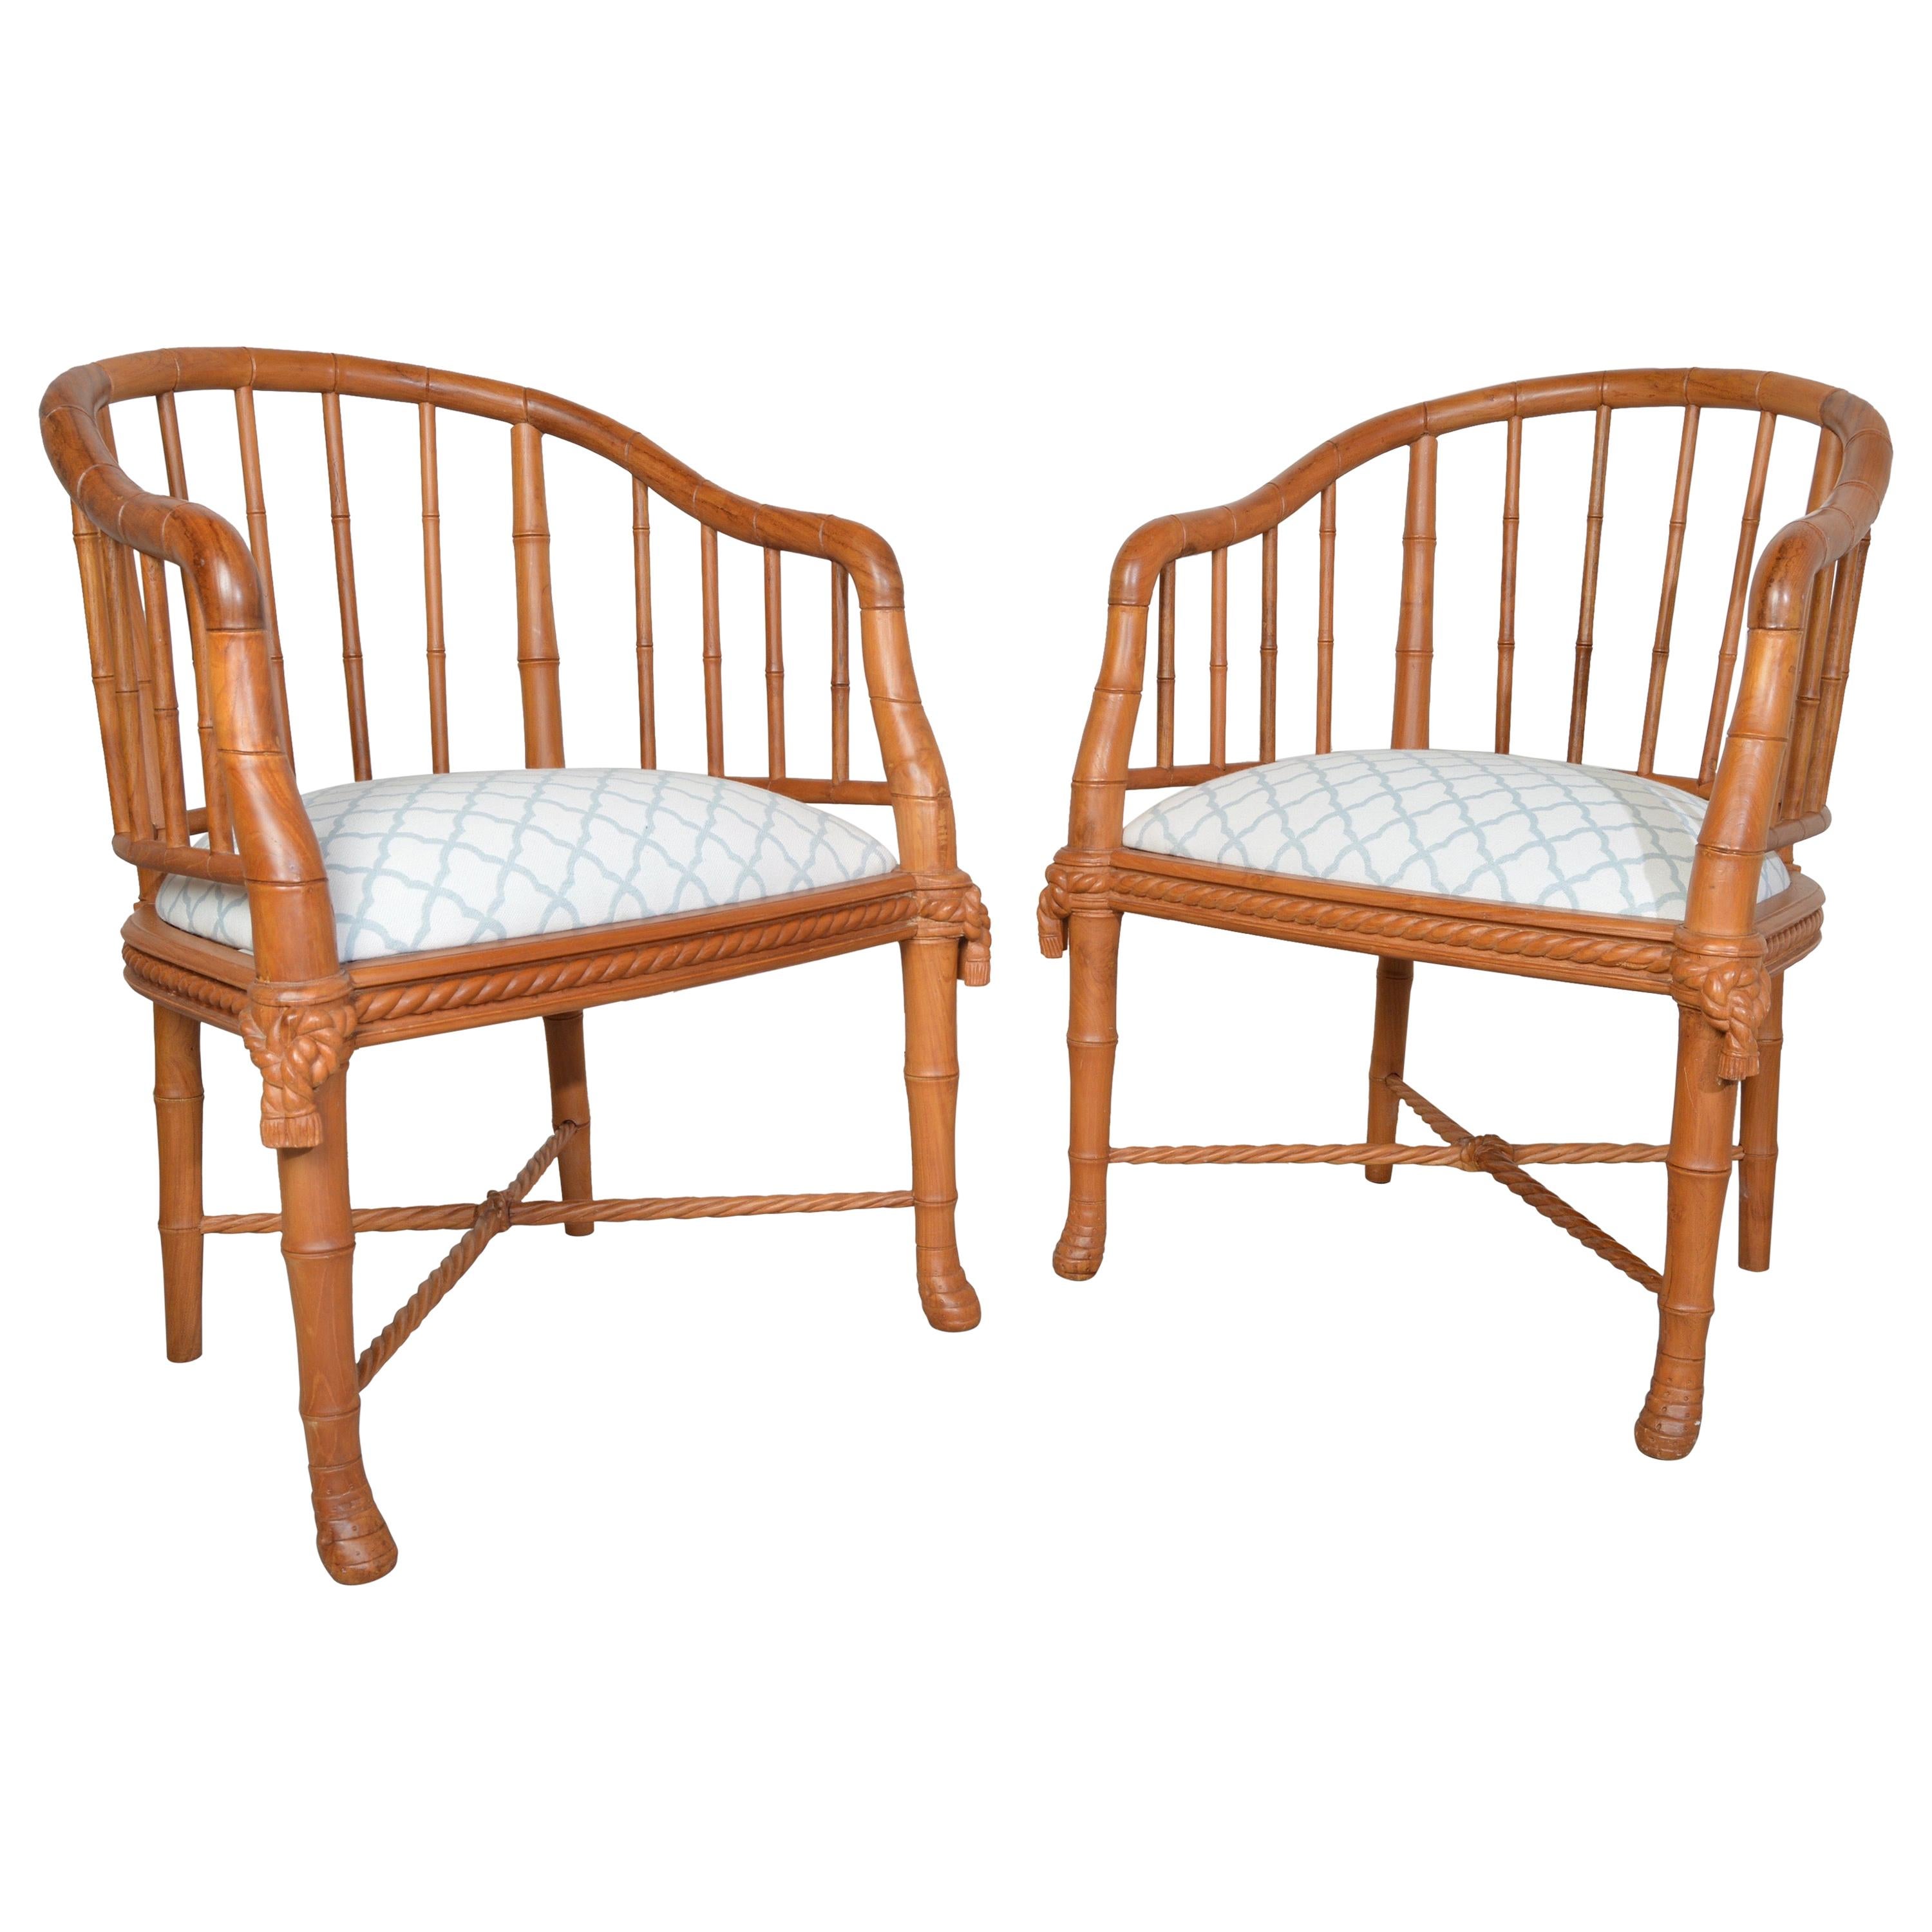 Hollywood Regency Napoleon Style Faux Bamboo Barrel Back Chairs in Teak